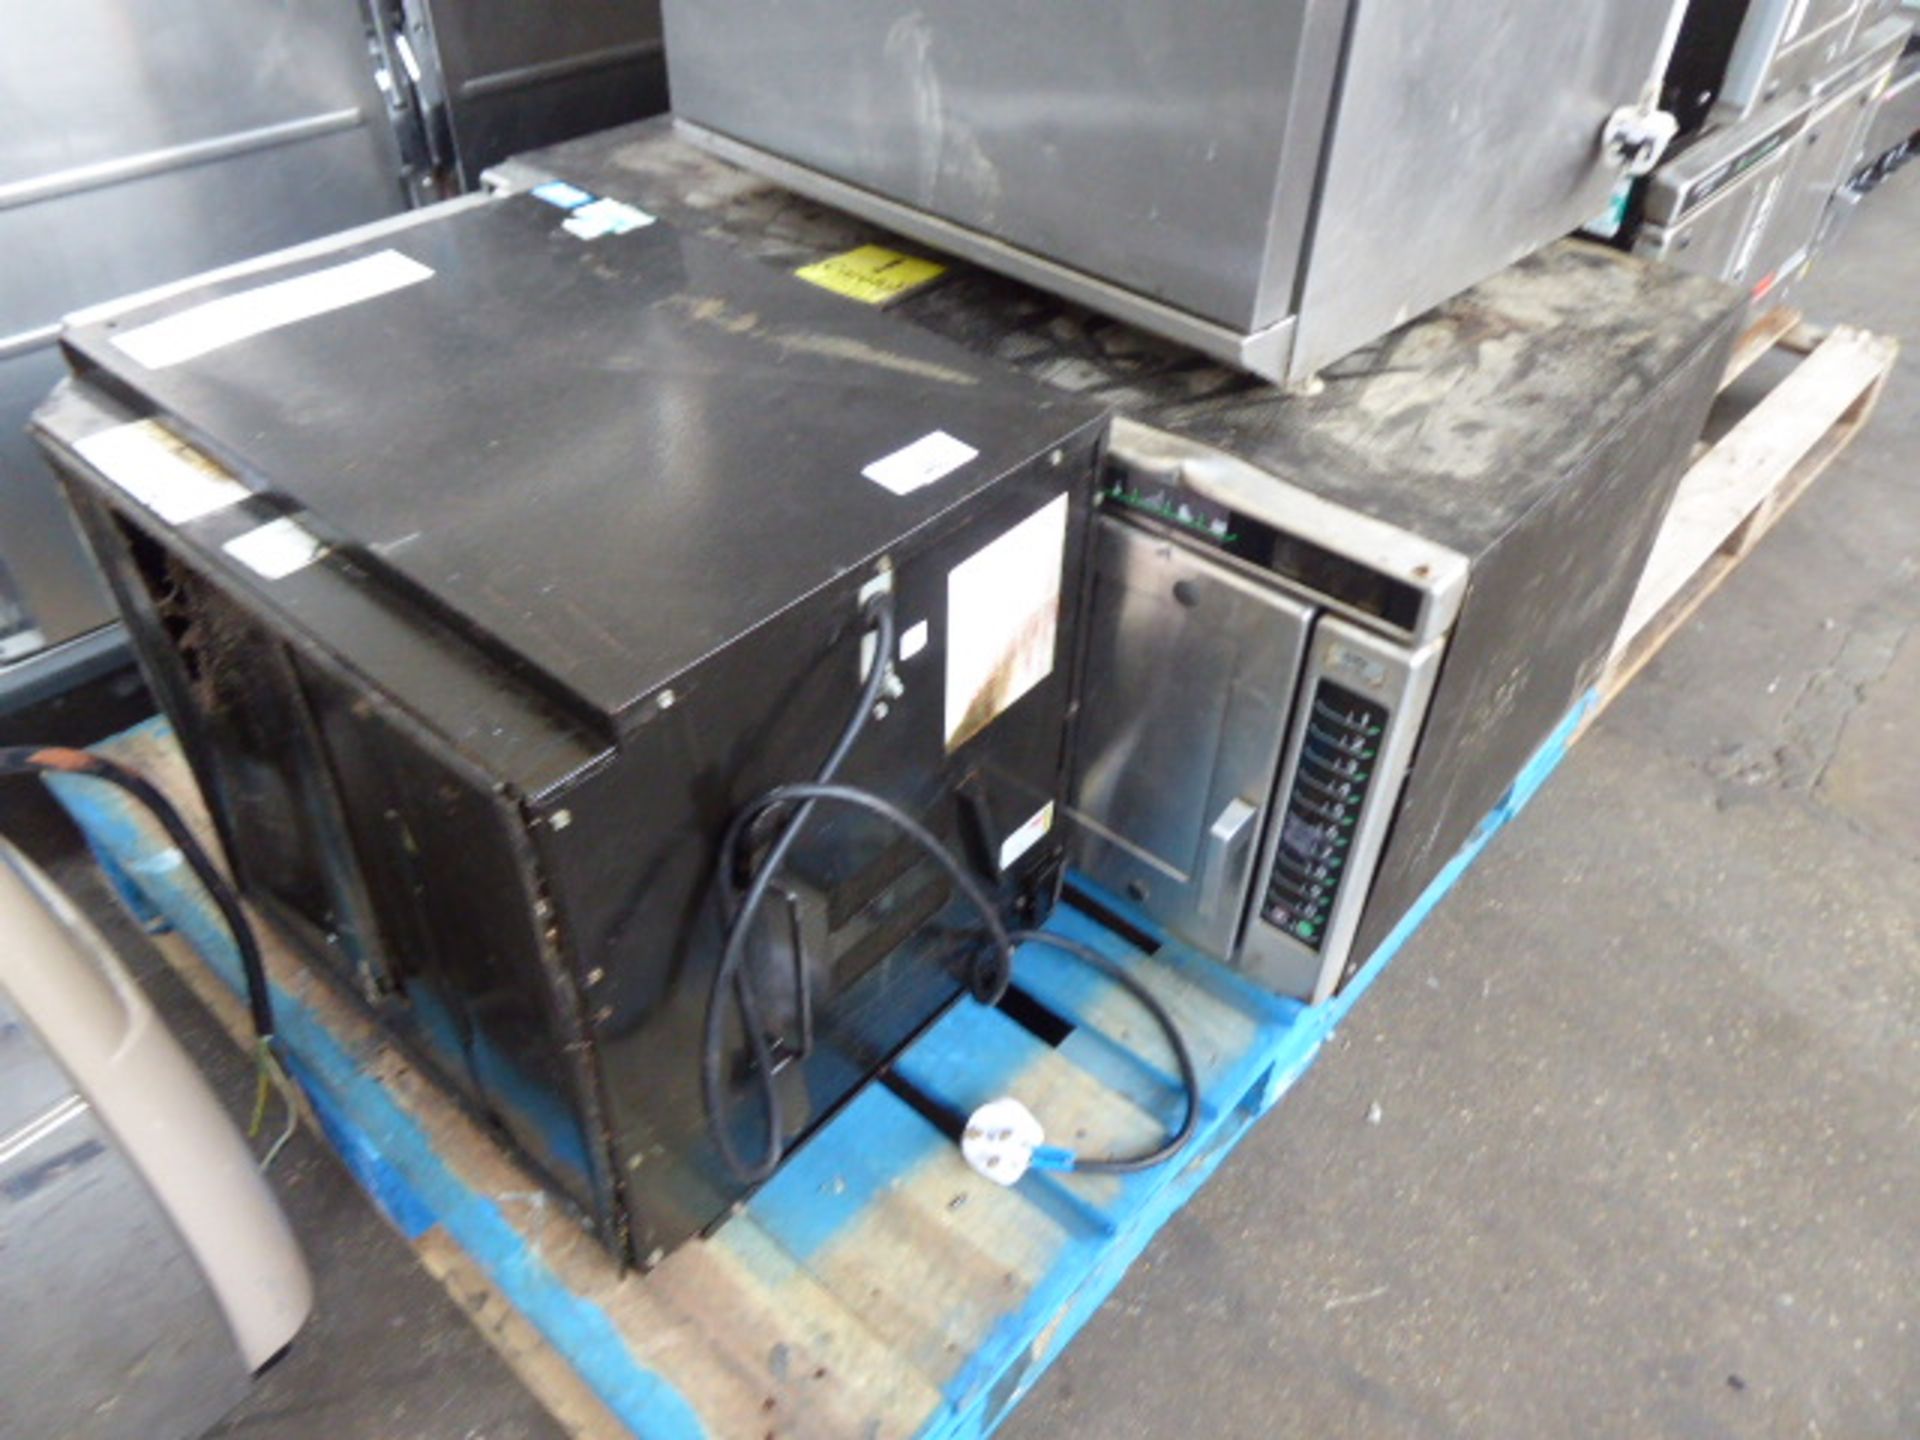 3 50cm commercial microwave ovens (Failed electrical test)